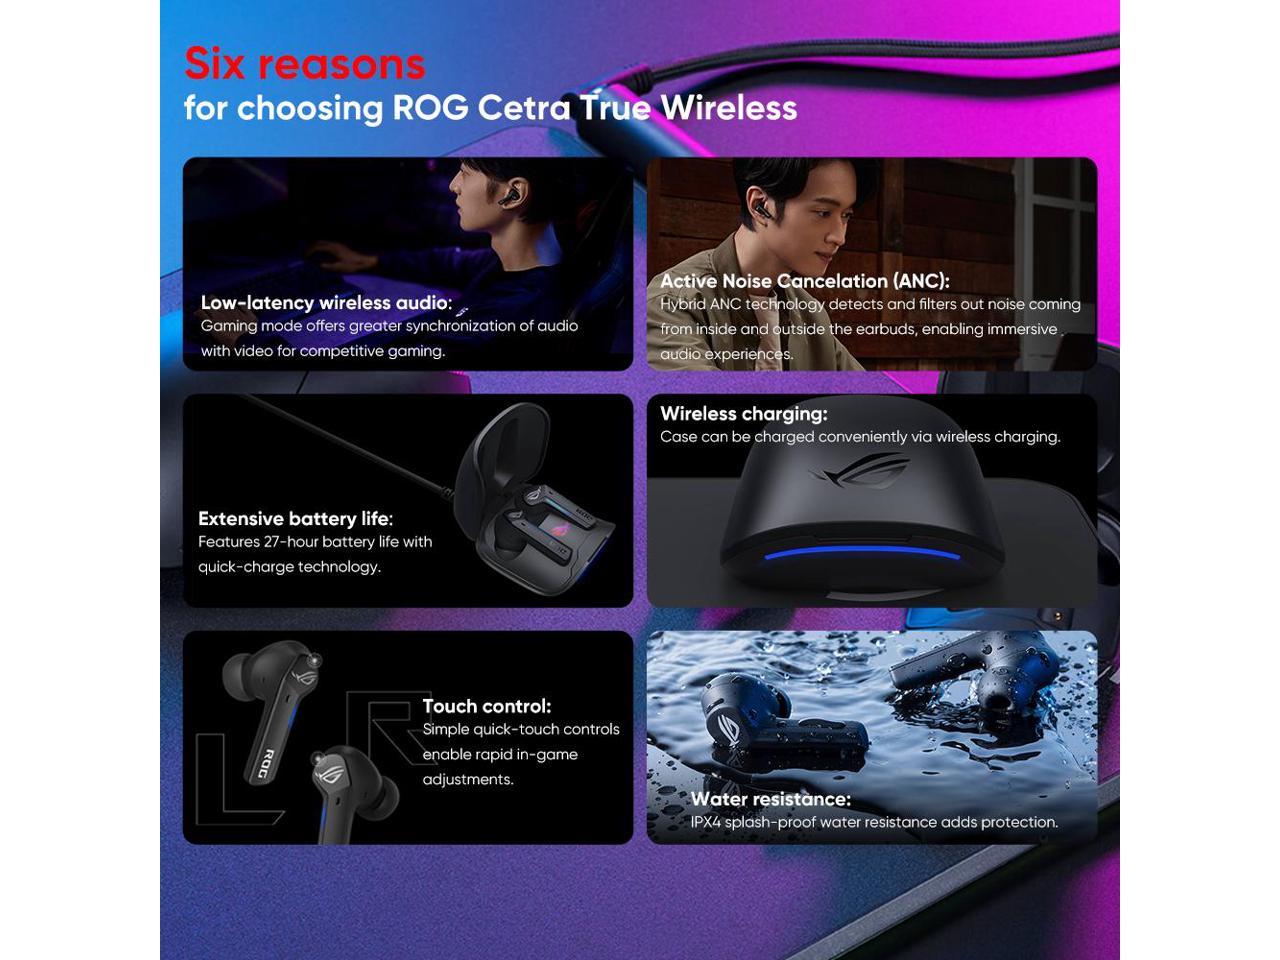 ASUS ROG Cetra True Wireless Gaming Earbuds, Low-Latency Bluetooth Earbuds,  Active Noise Cancelation, 27-Hour Battery Life, IPX4 Water Resistance